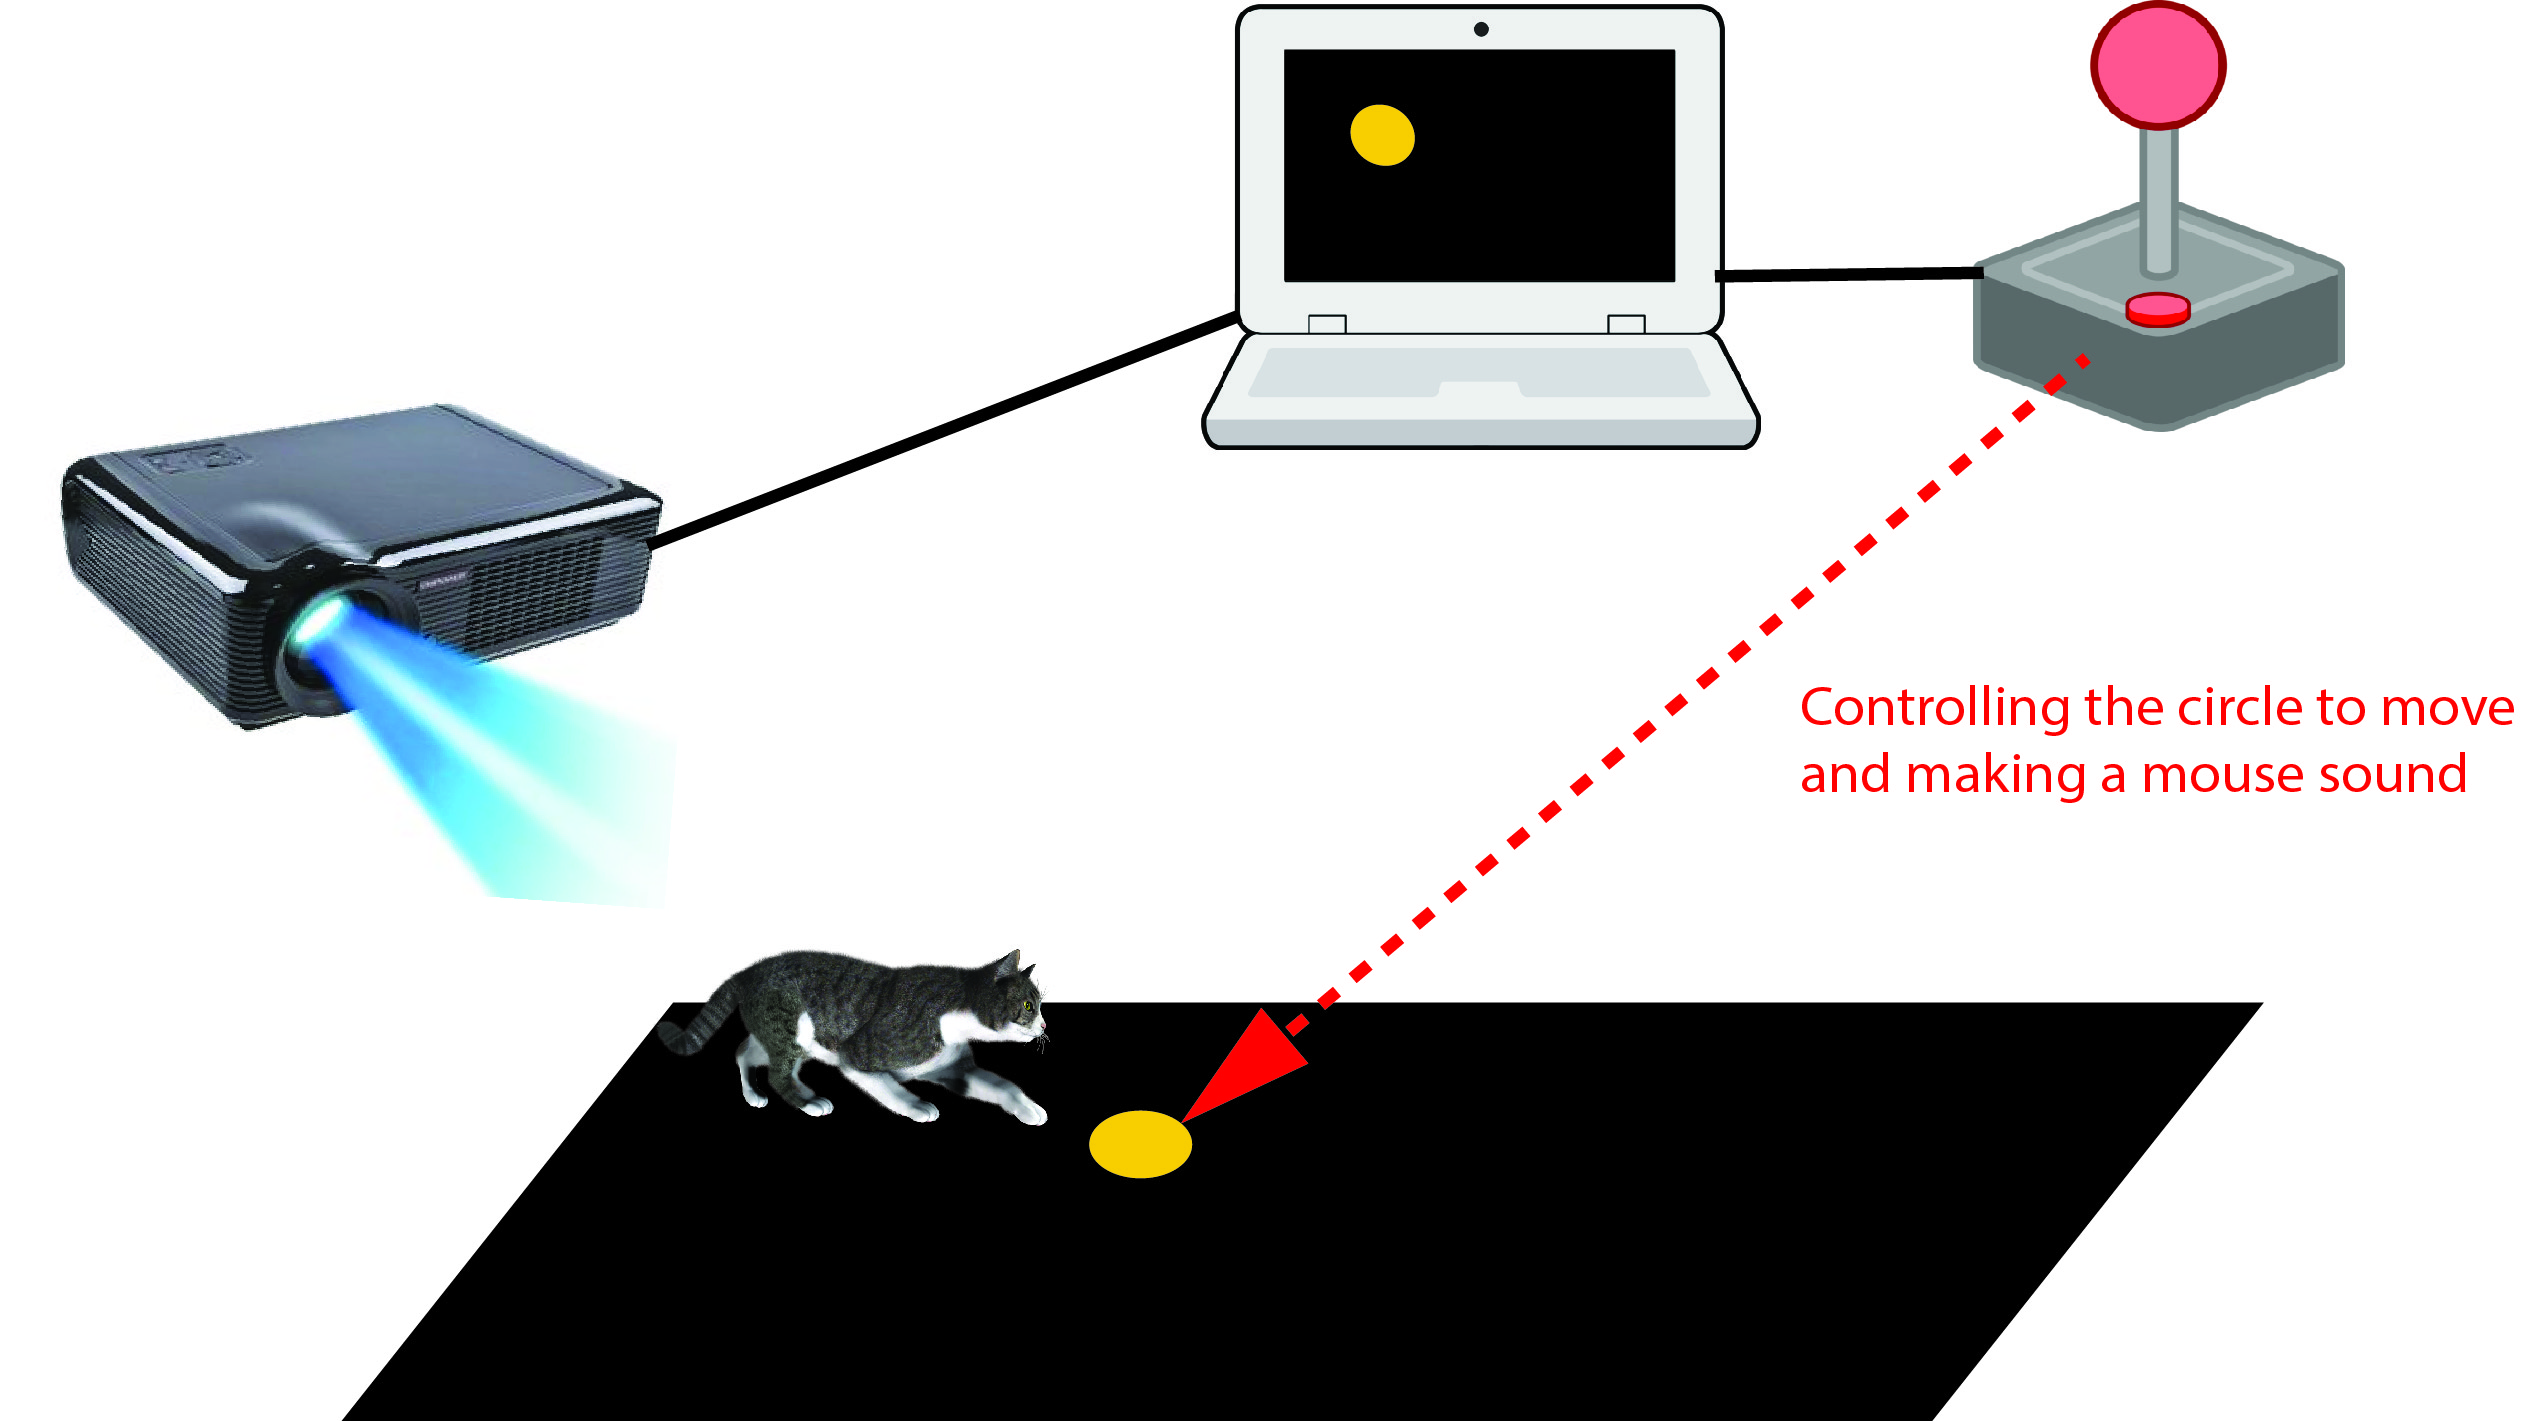 Make a cat chase a ball with a joystick